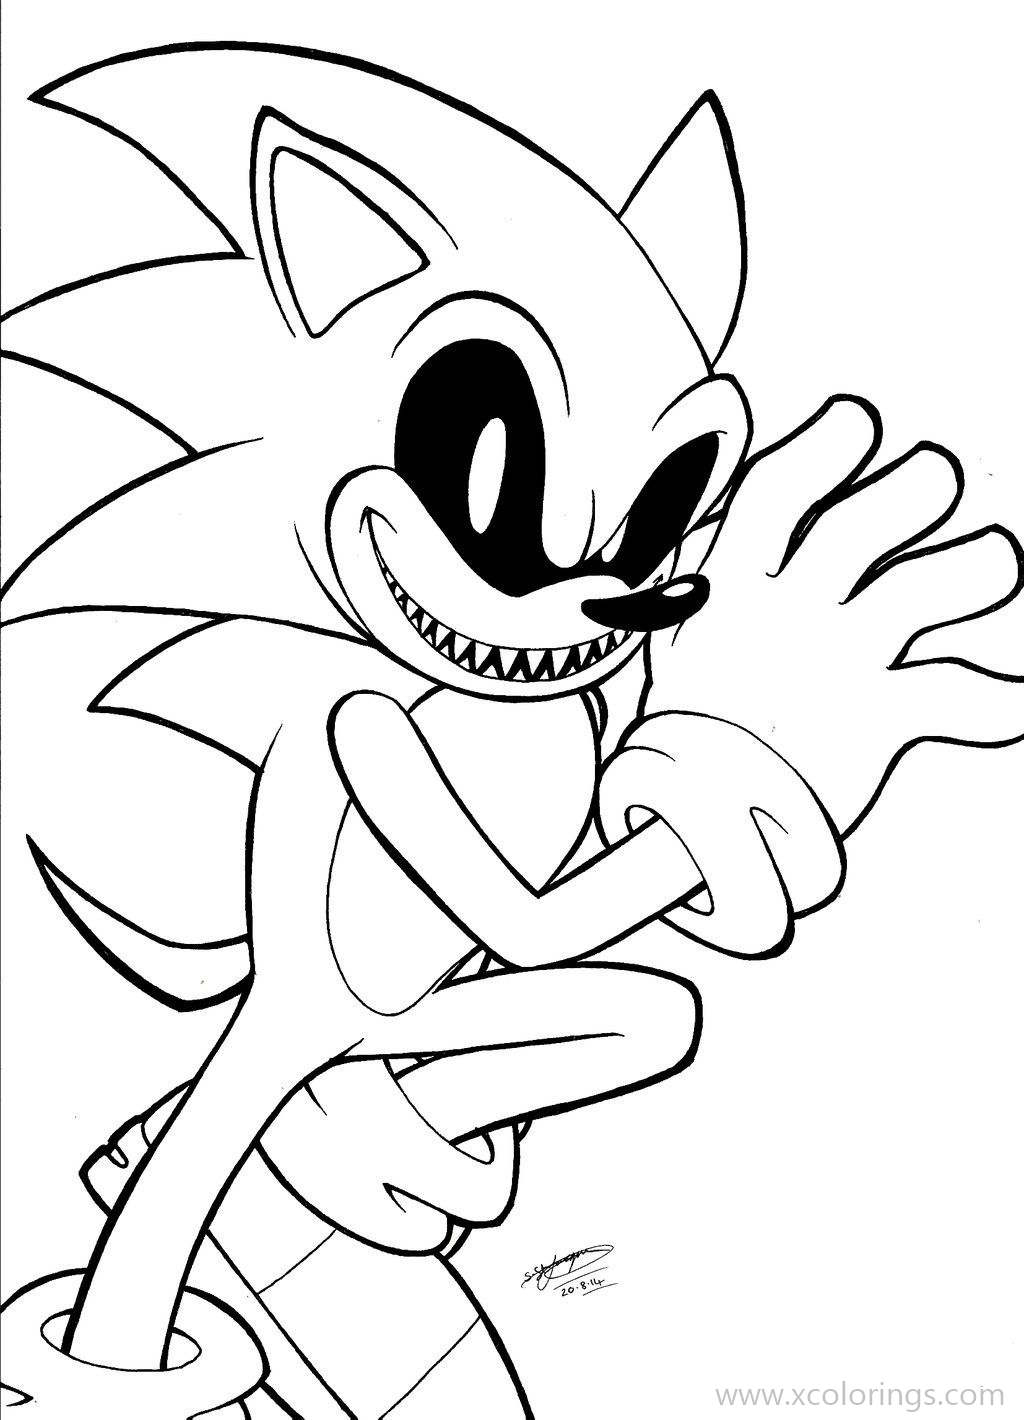 Sonic Exe Coloring Pages Fan Art - XColorings.com